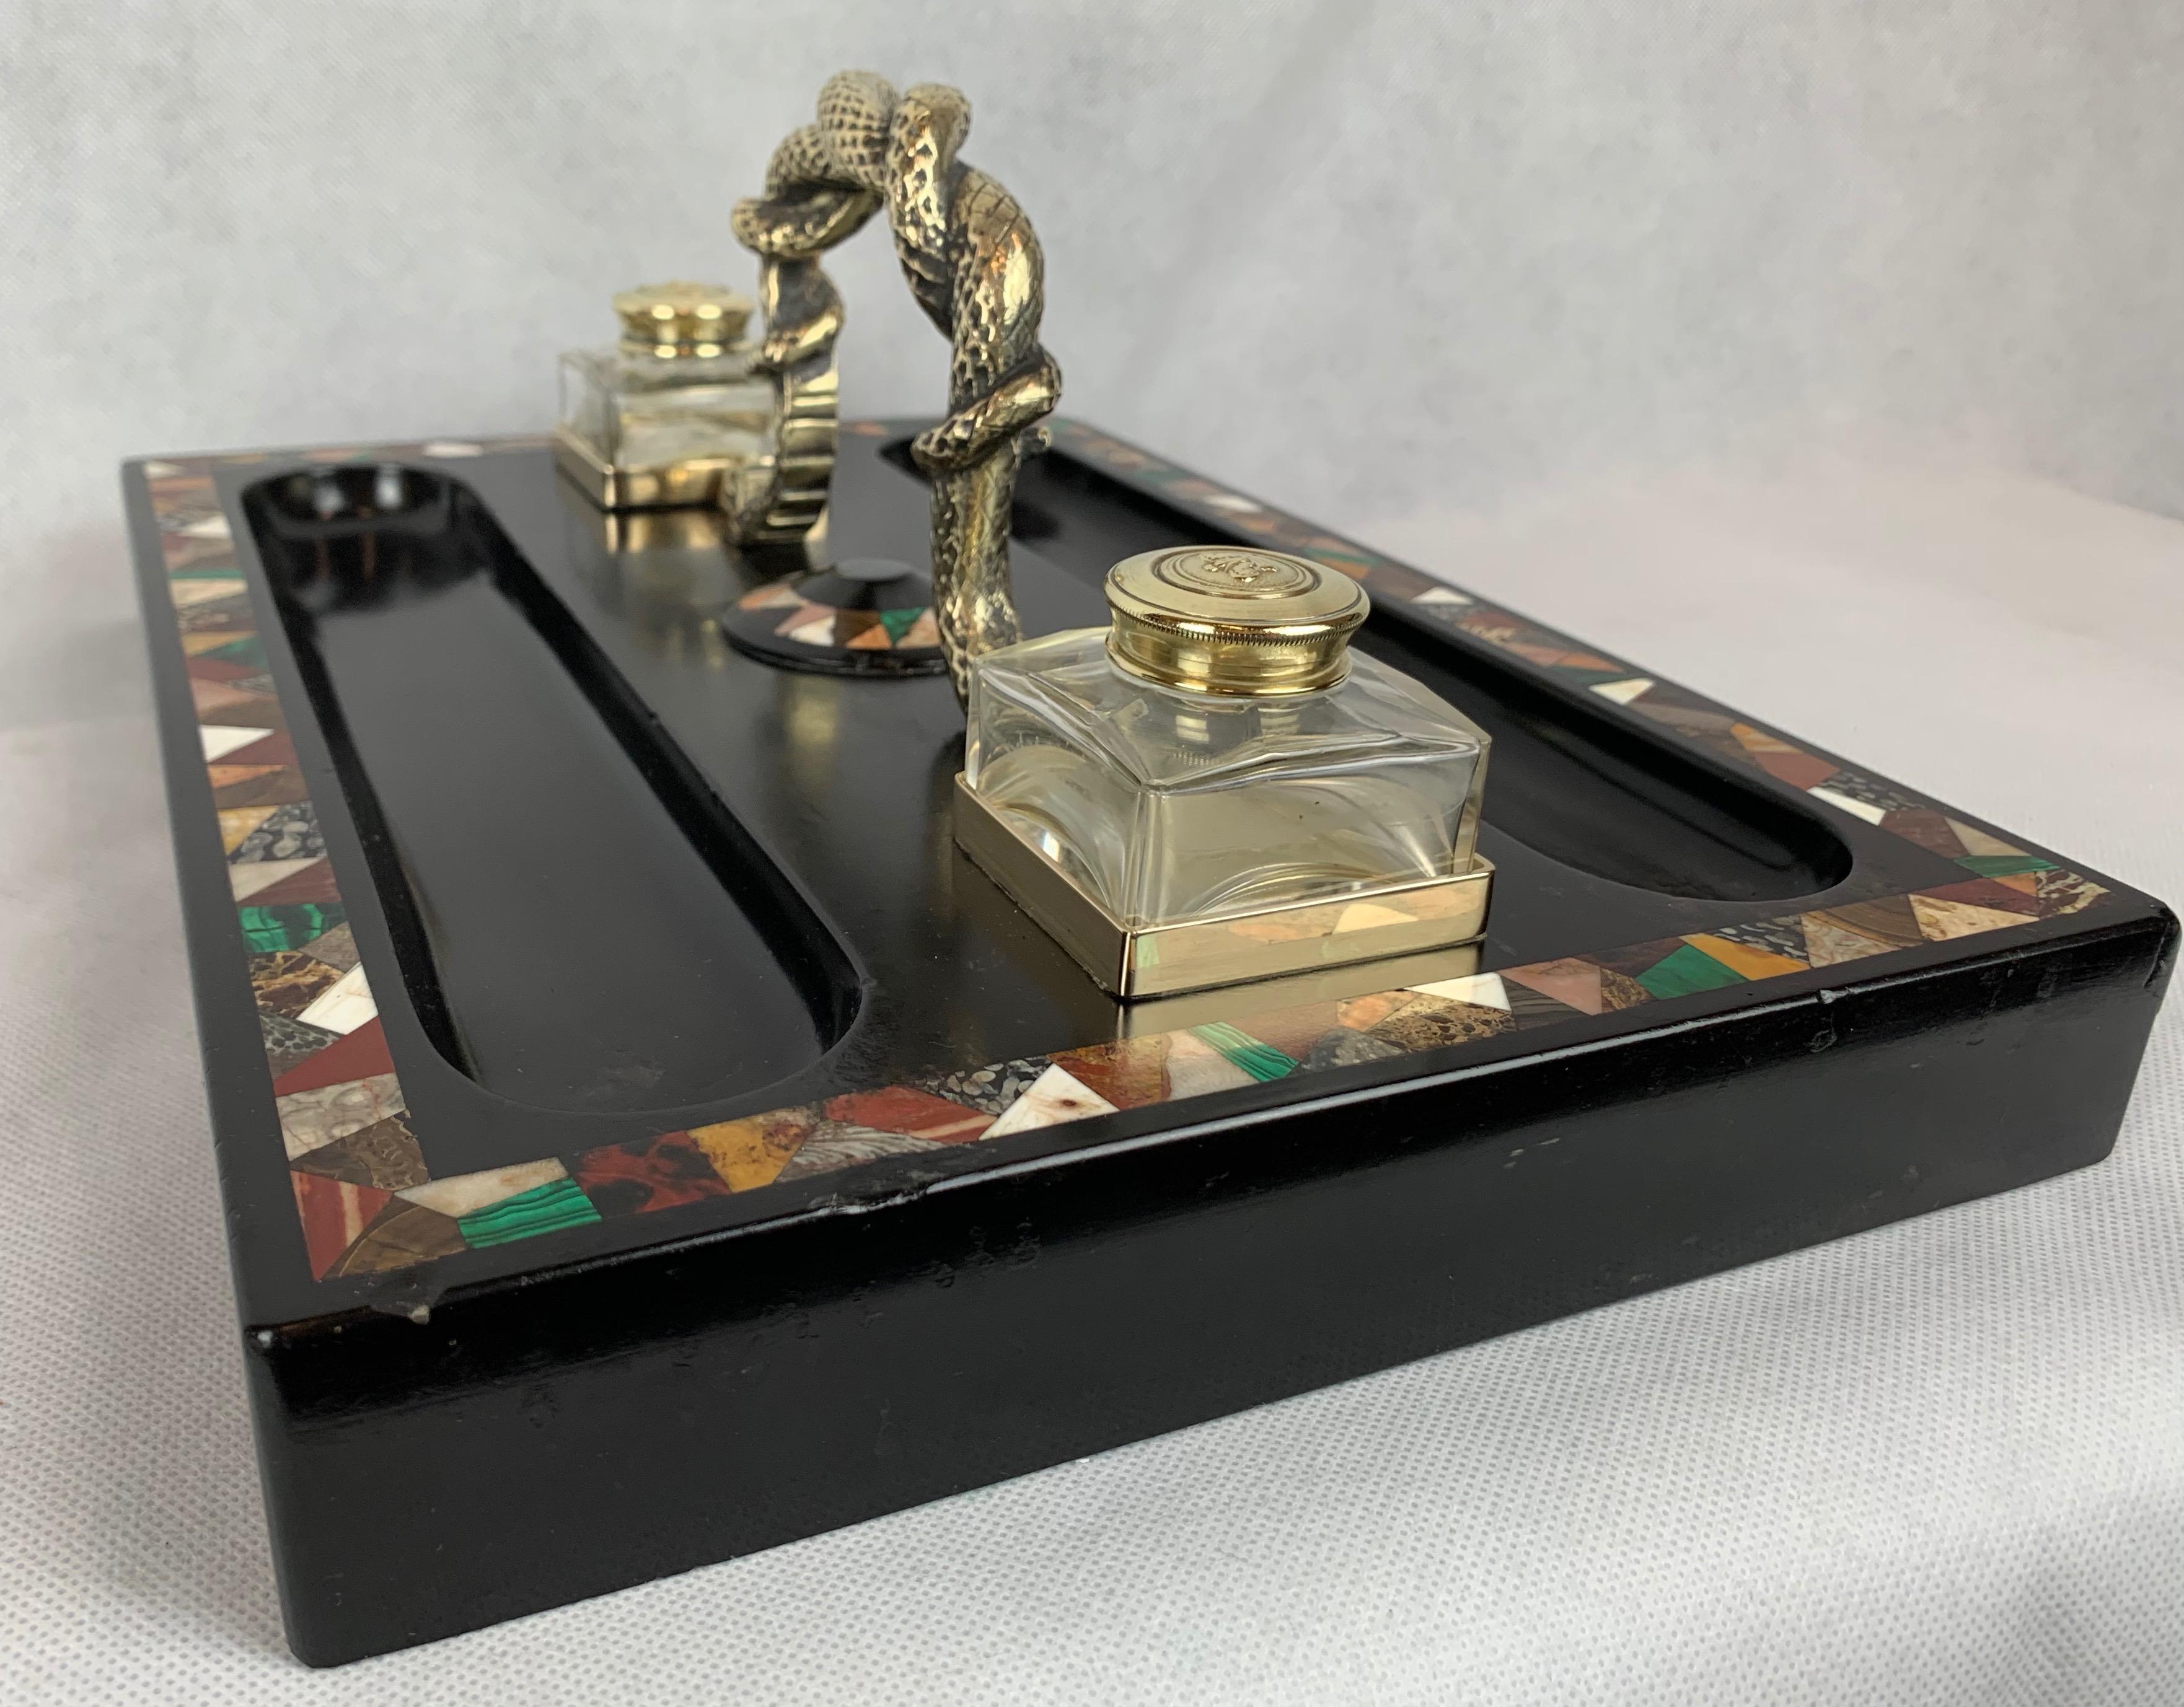 Large English Regency inkstand originally created for a partner's desk with a bronze handle of entwined serpents. The matching blown crystal inkpots have lids with embossed crowns. The Pietra Dura band on the base is set into Belgian black marble.